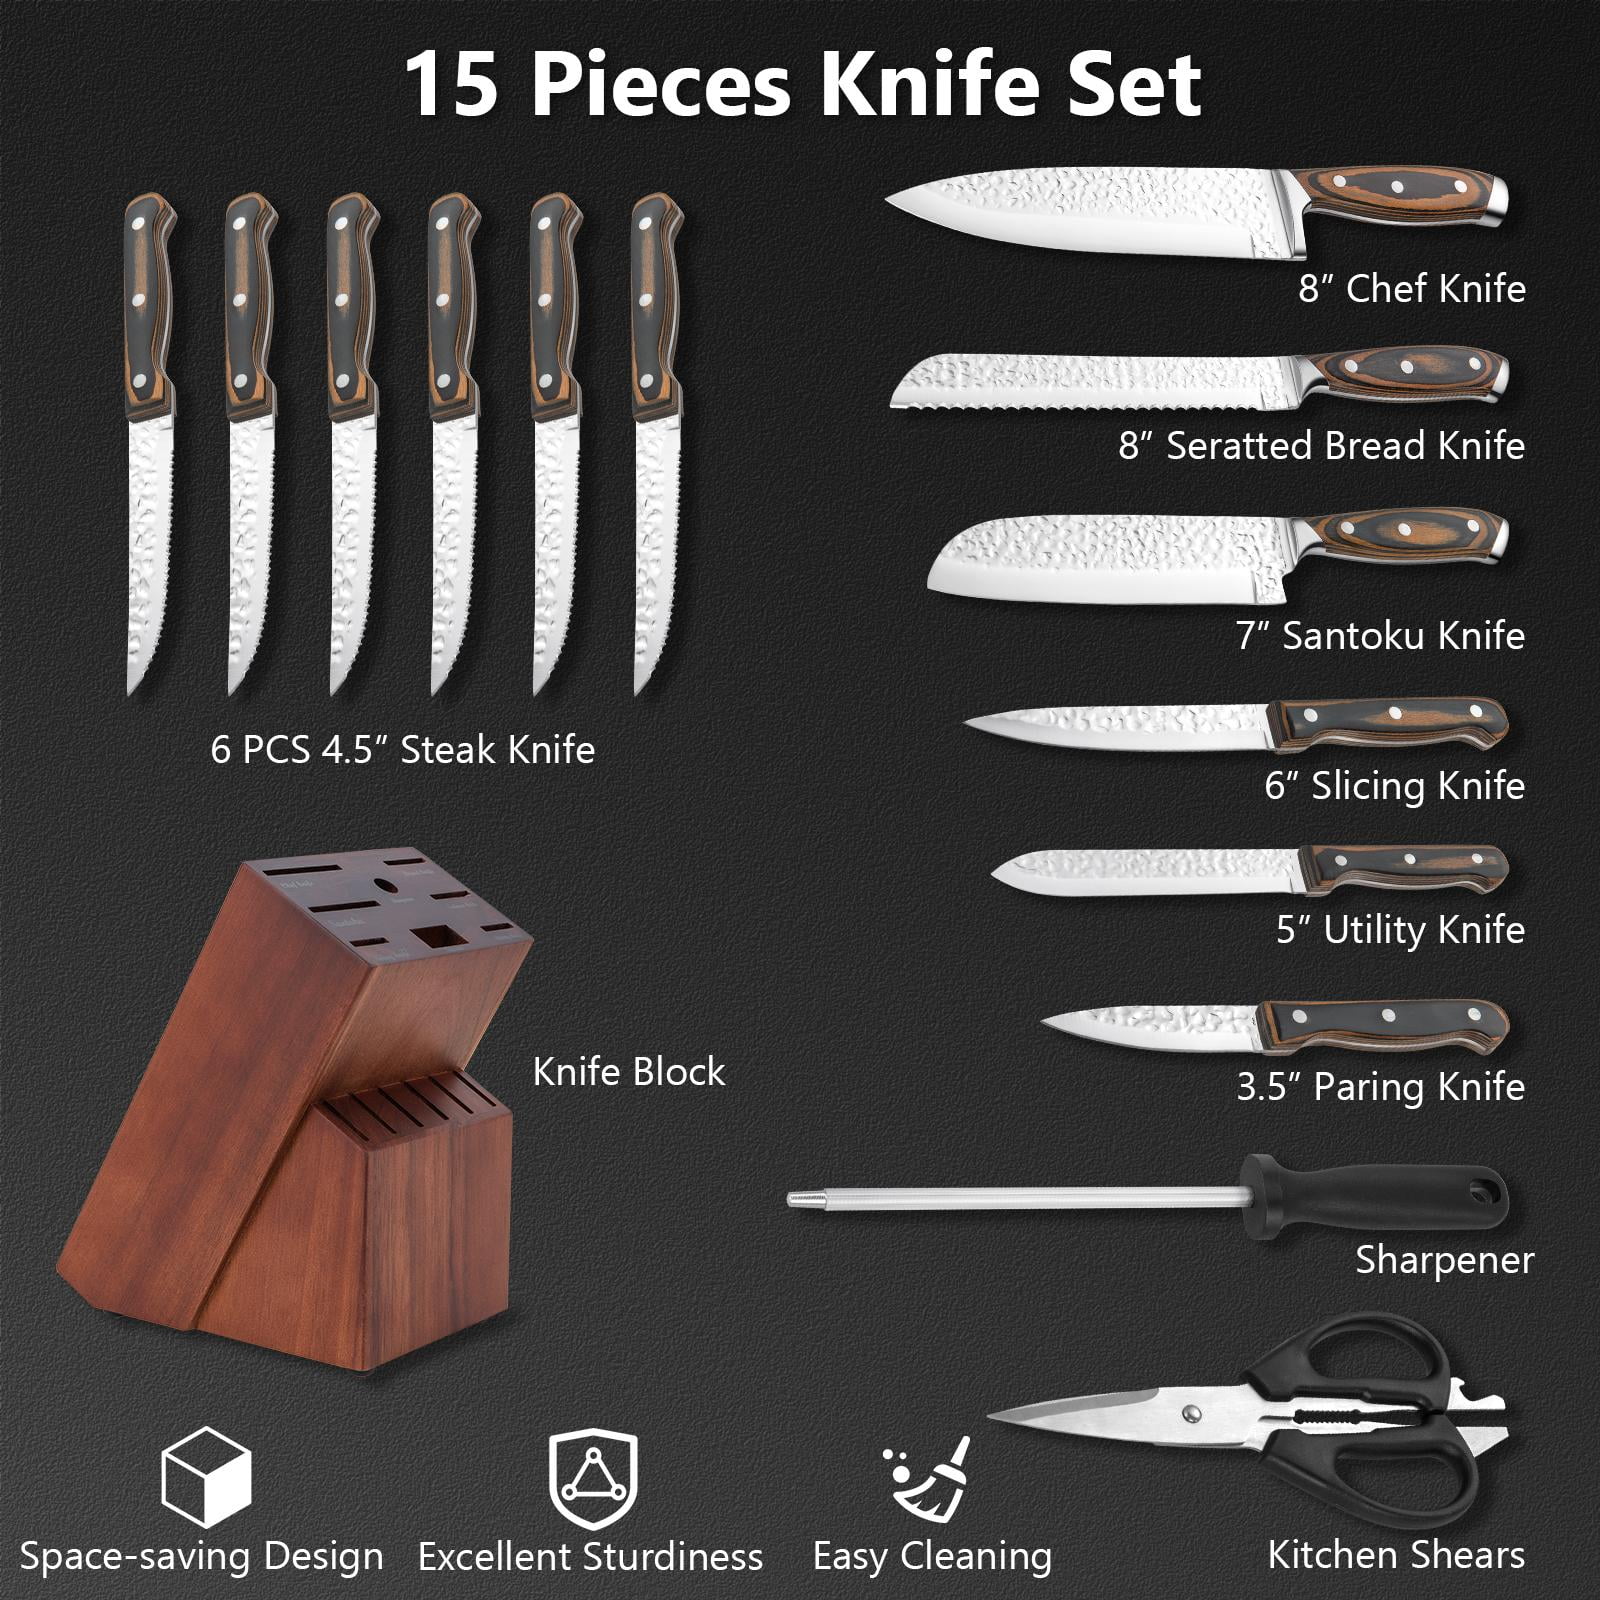 Giantex 5-Piece Kitchen Knife Set w/Block, Stainless Steel Knife Set w/ Hammered Design, All-in-One Knife Block Set w/Multipurpose Shears 